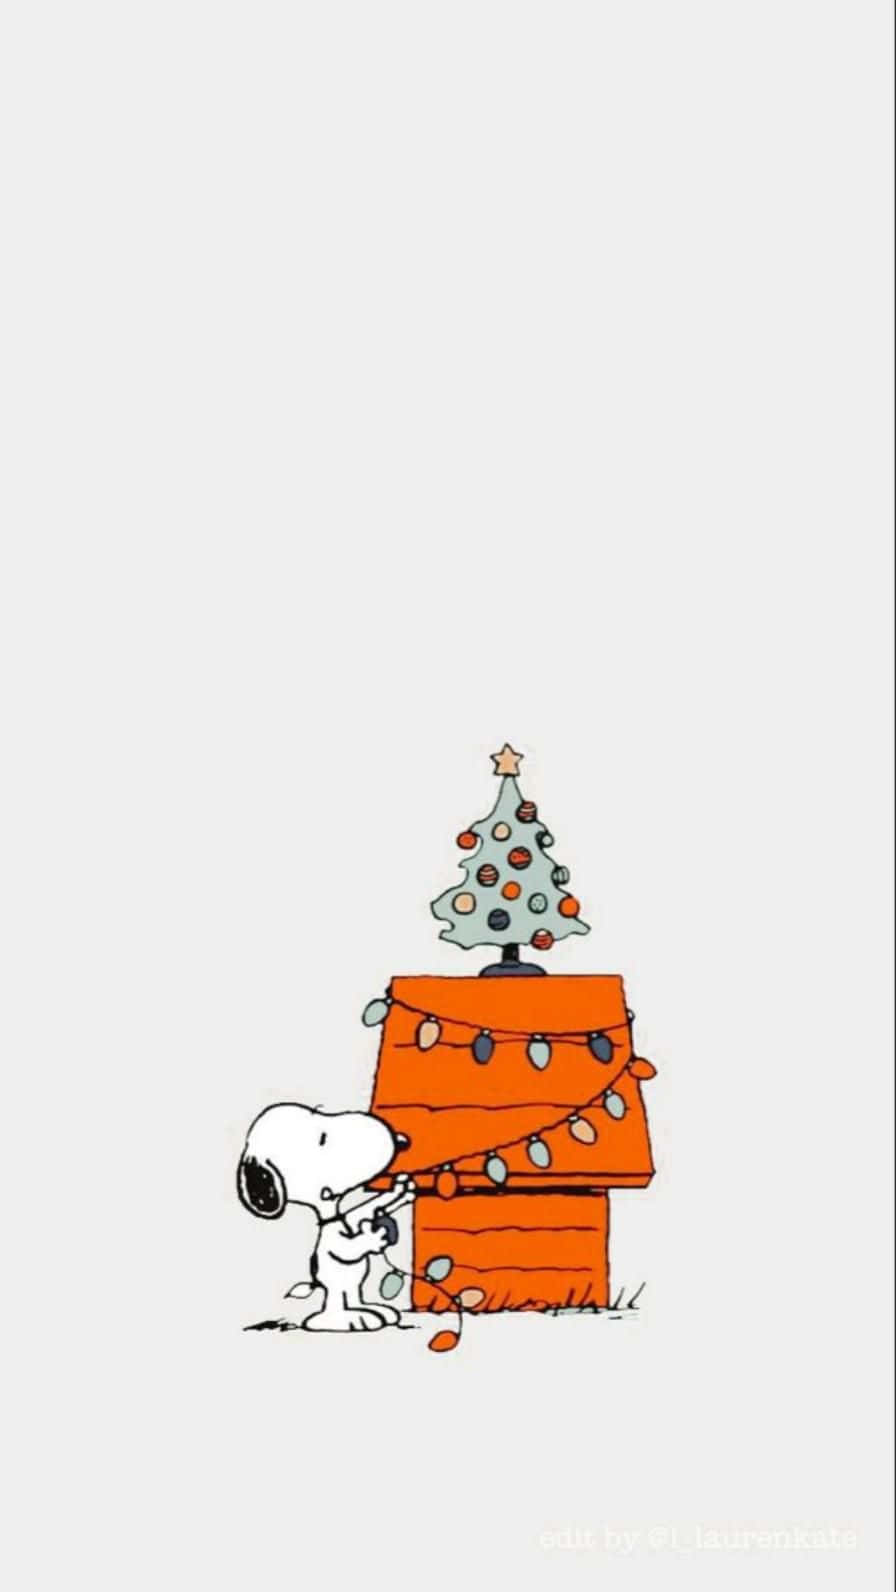 Download Minimalist Cute Snoopy Christmas Wallpaper | Wallpapers.com